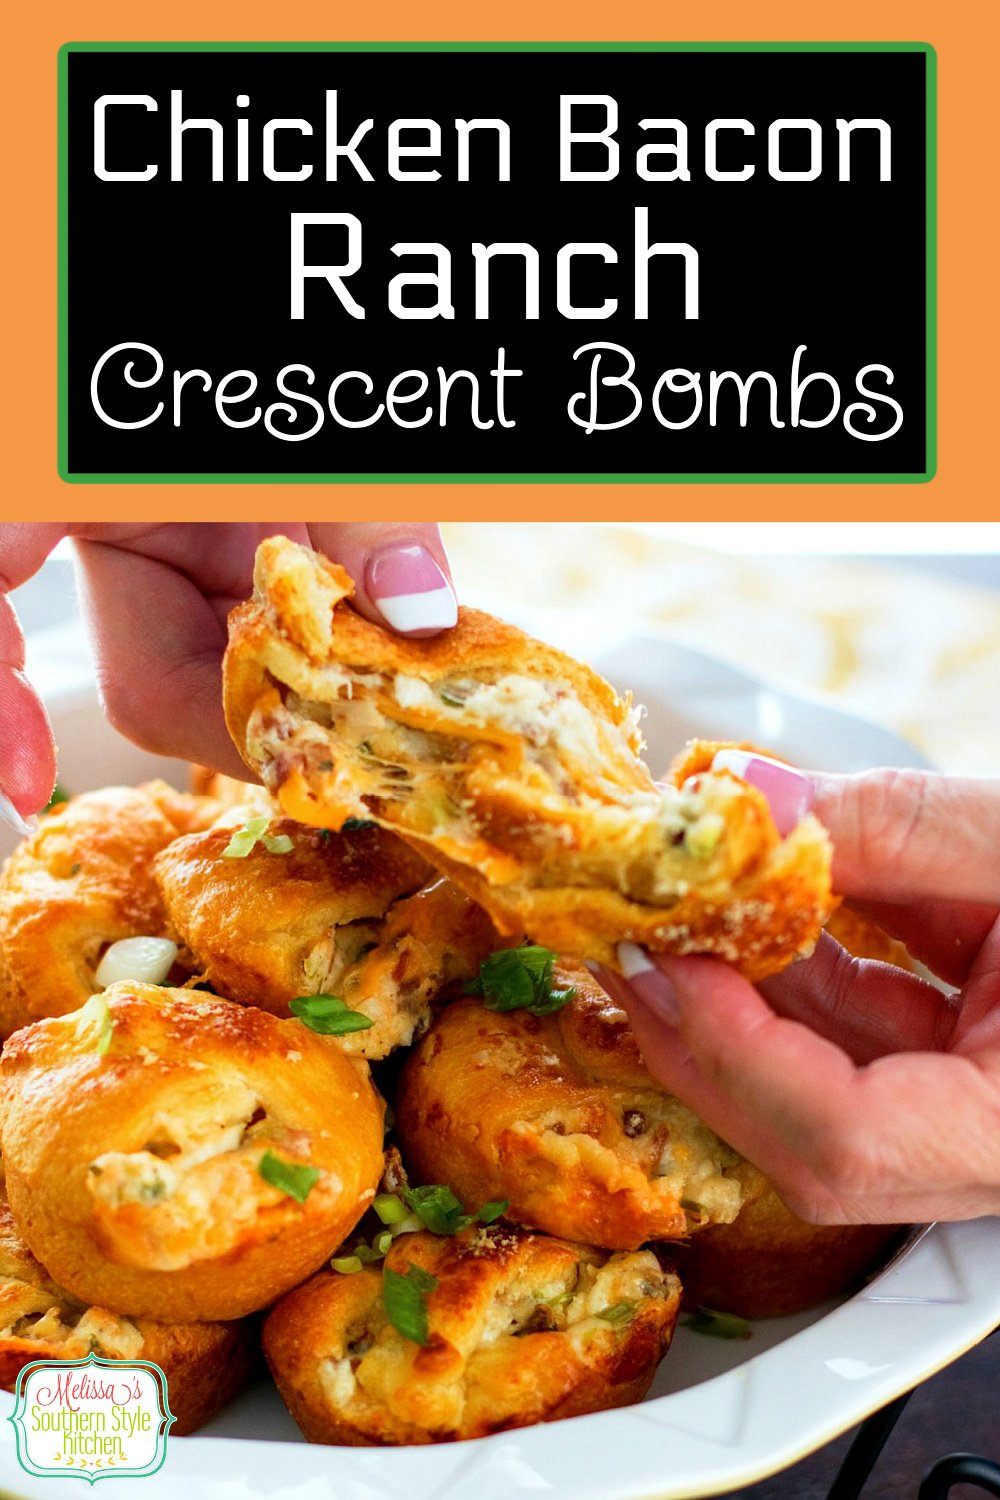 Chicken Bacon Ranch Crescent Bombs for game day snacks or casual meals #chickenbaconranch #chicken #chickenrecipes #bacon #ranchdressing #crescentrolls #crescentbombs #crescentrollrecipes #rotisseriechickenrecipes via @melissasssk